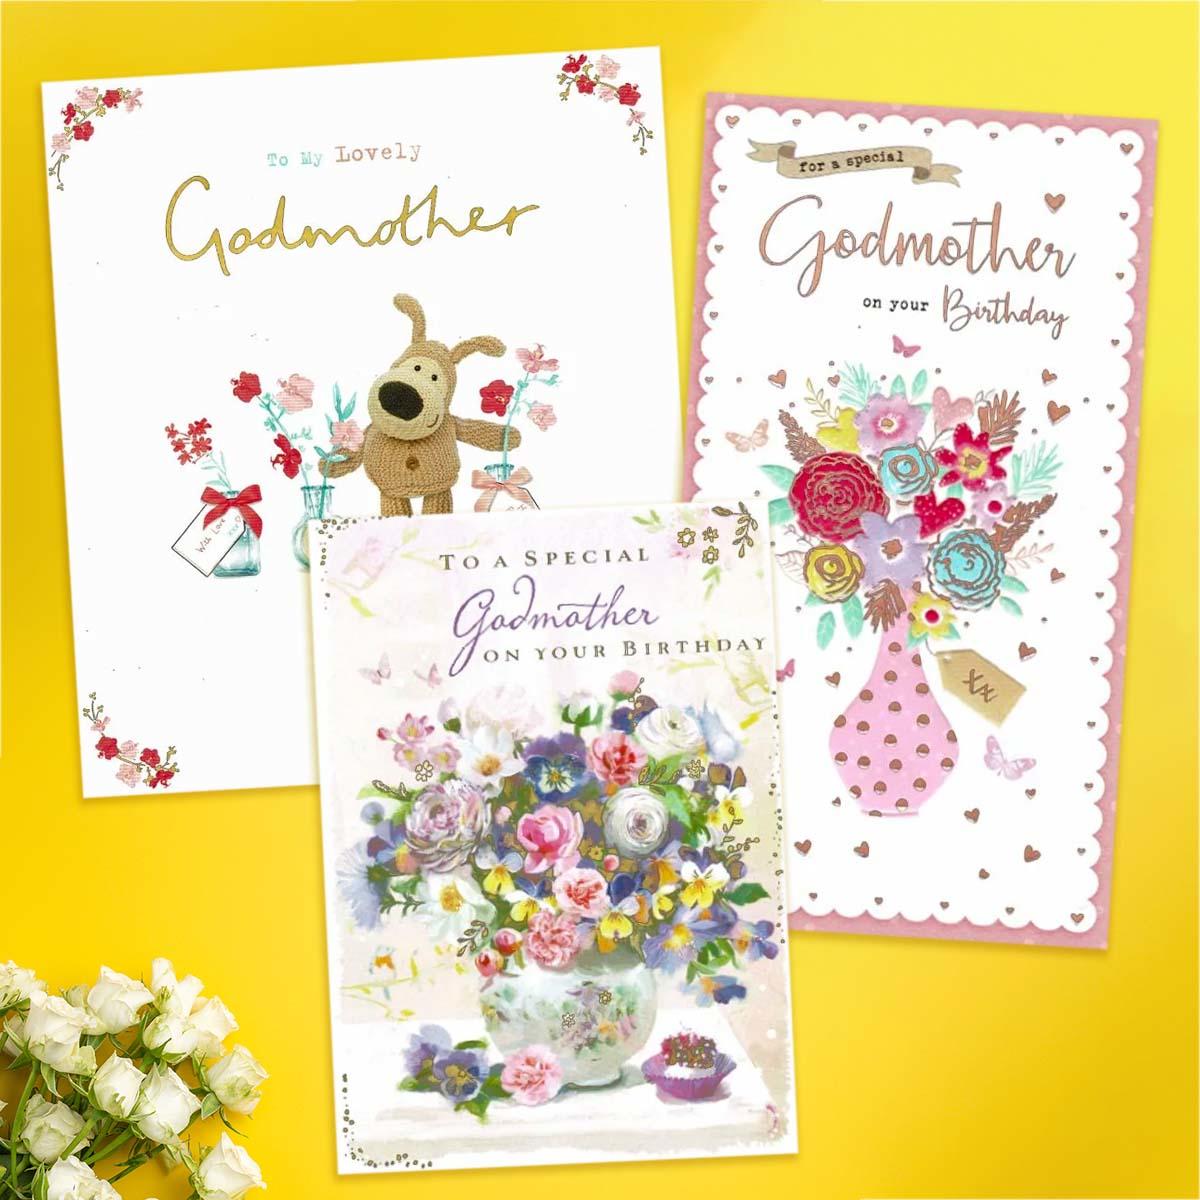 A Selection Of Cards To Show The Depth Of Range In Our Godmother Birthday Card Section